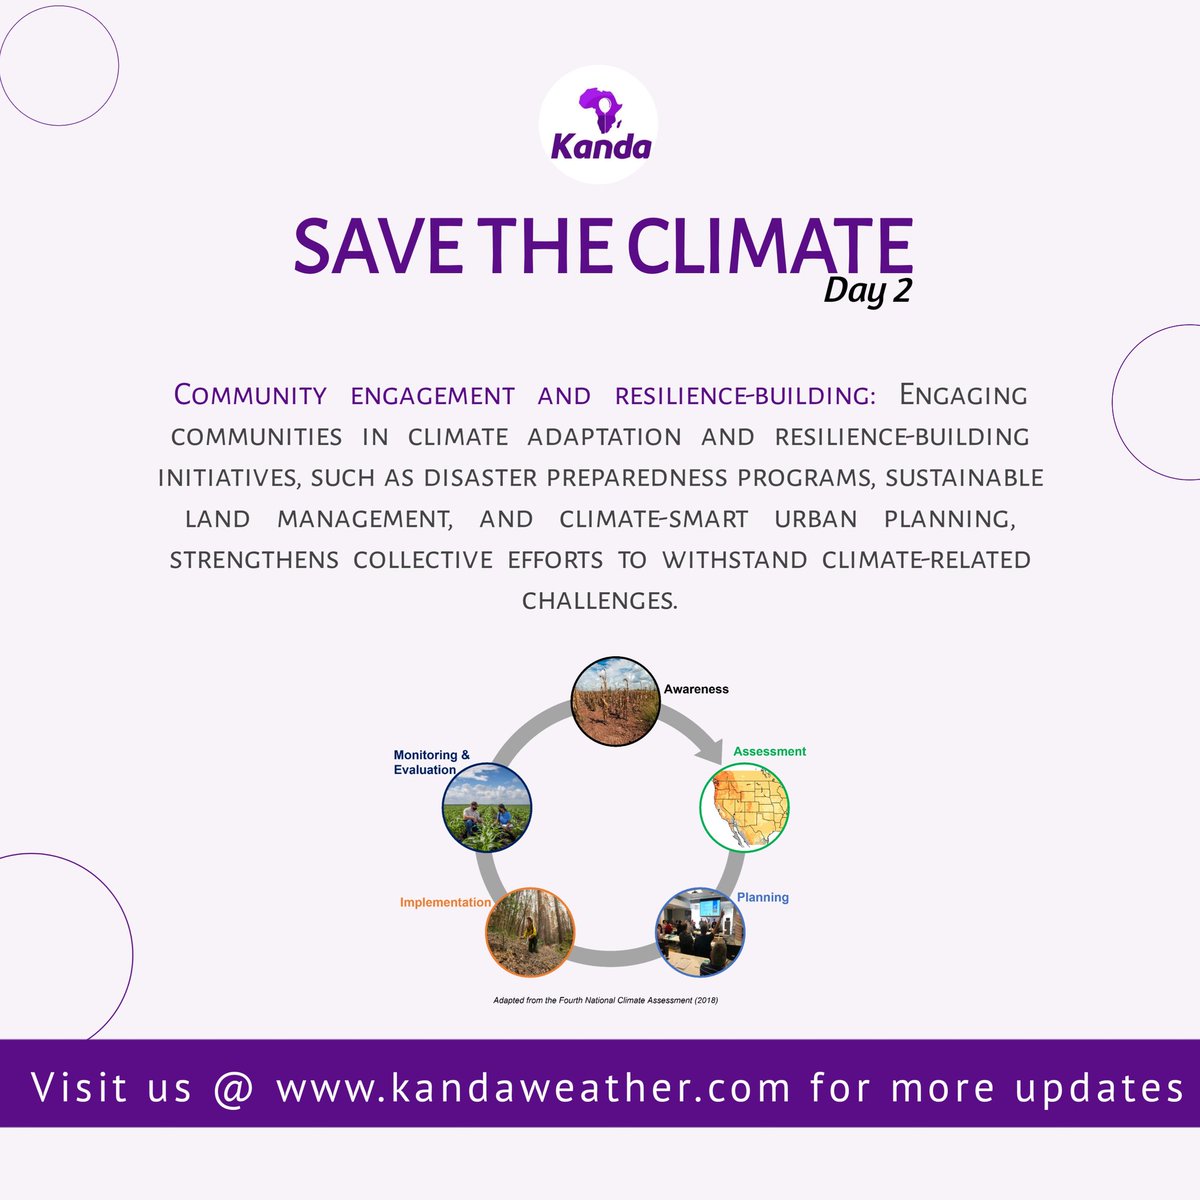 #SaveTheClimate Day2/14 Empowering communities through resilience-building! We engage in climate adaptation programs, disaster preparedness and climate-smart urban planning to strengthen our collective resilience. Together, we can overcome climate challenges!#CommunityResilience